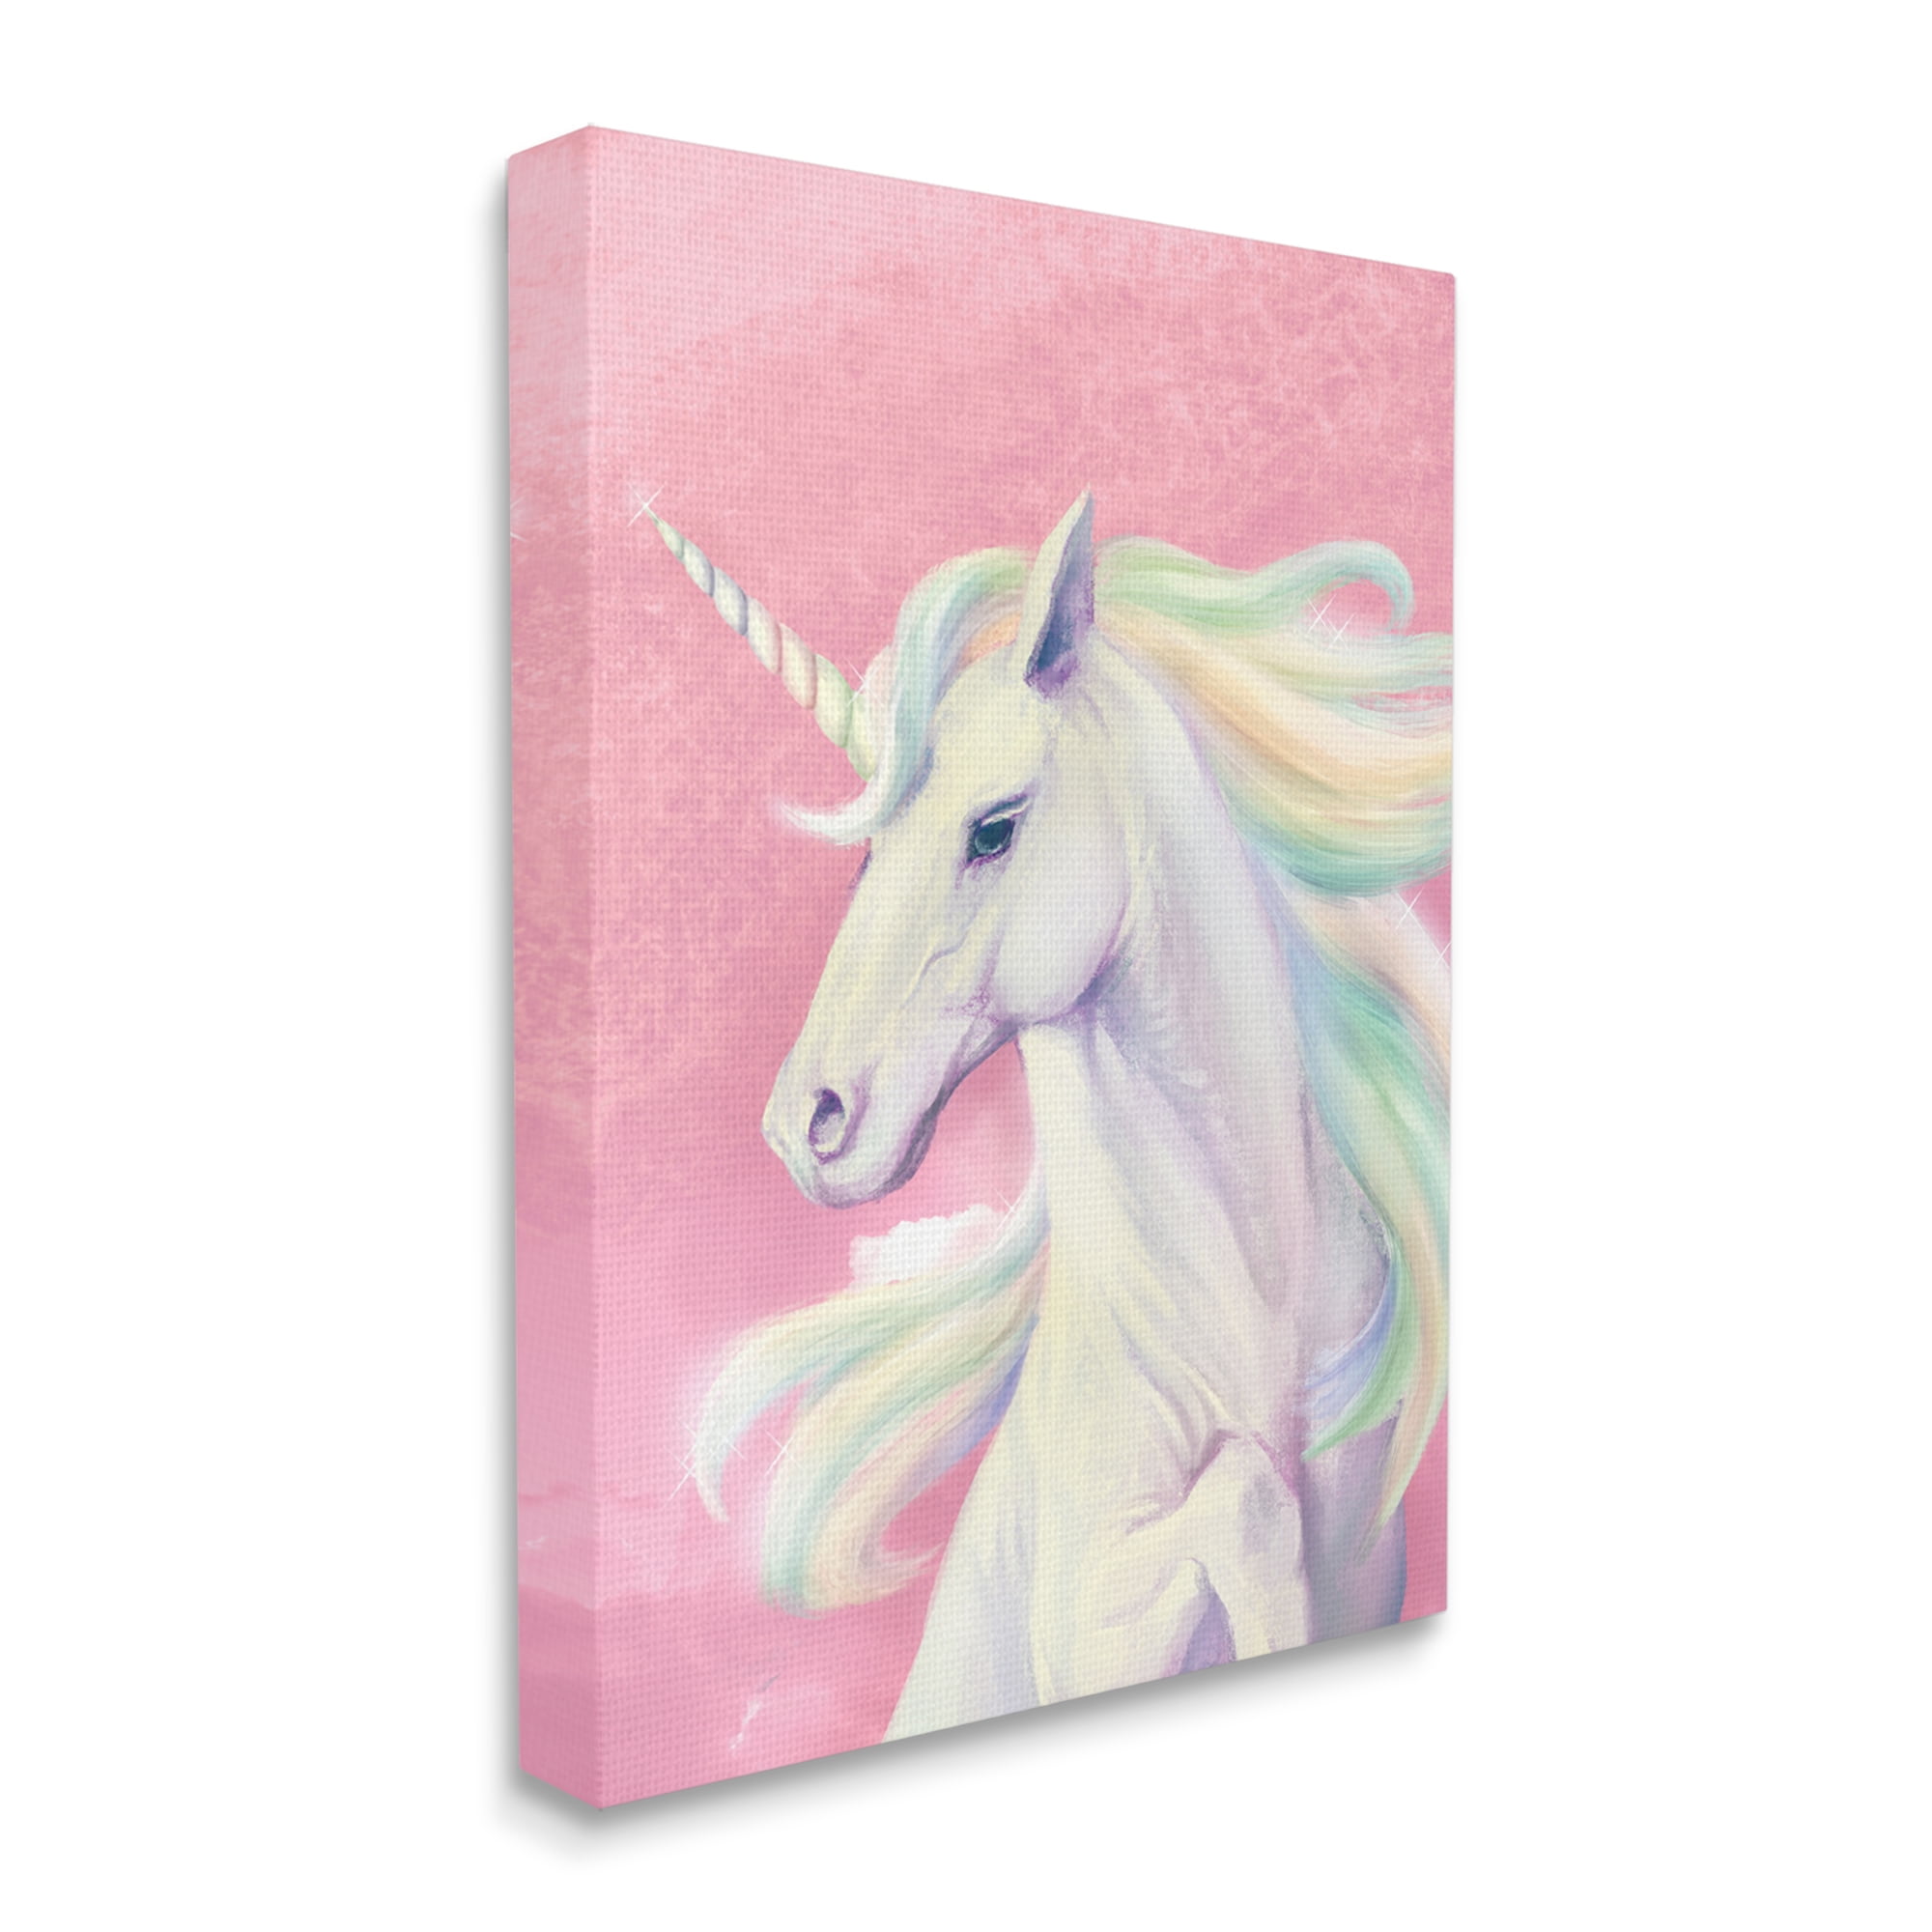 Unicorn Canvas Wall Art Colorful Unicorn Elf Peacock Castle Pictures Print  Framed Unicorn Decor For Girls Princess Room Modern Home Artwork Unicorn  Painting For Nursery Girl Bedroom 16x20 inch : : Home